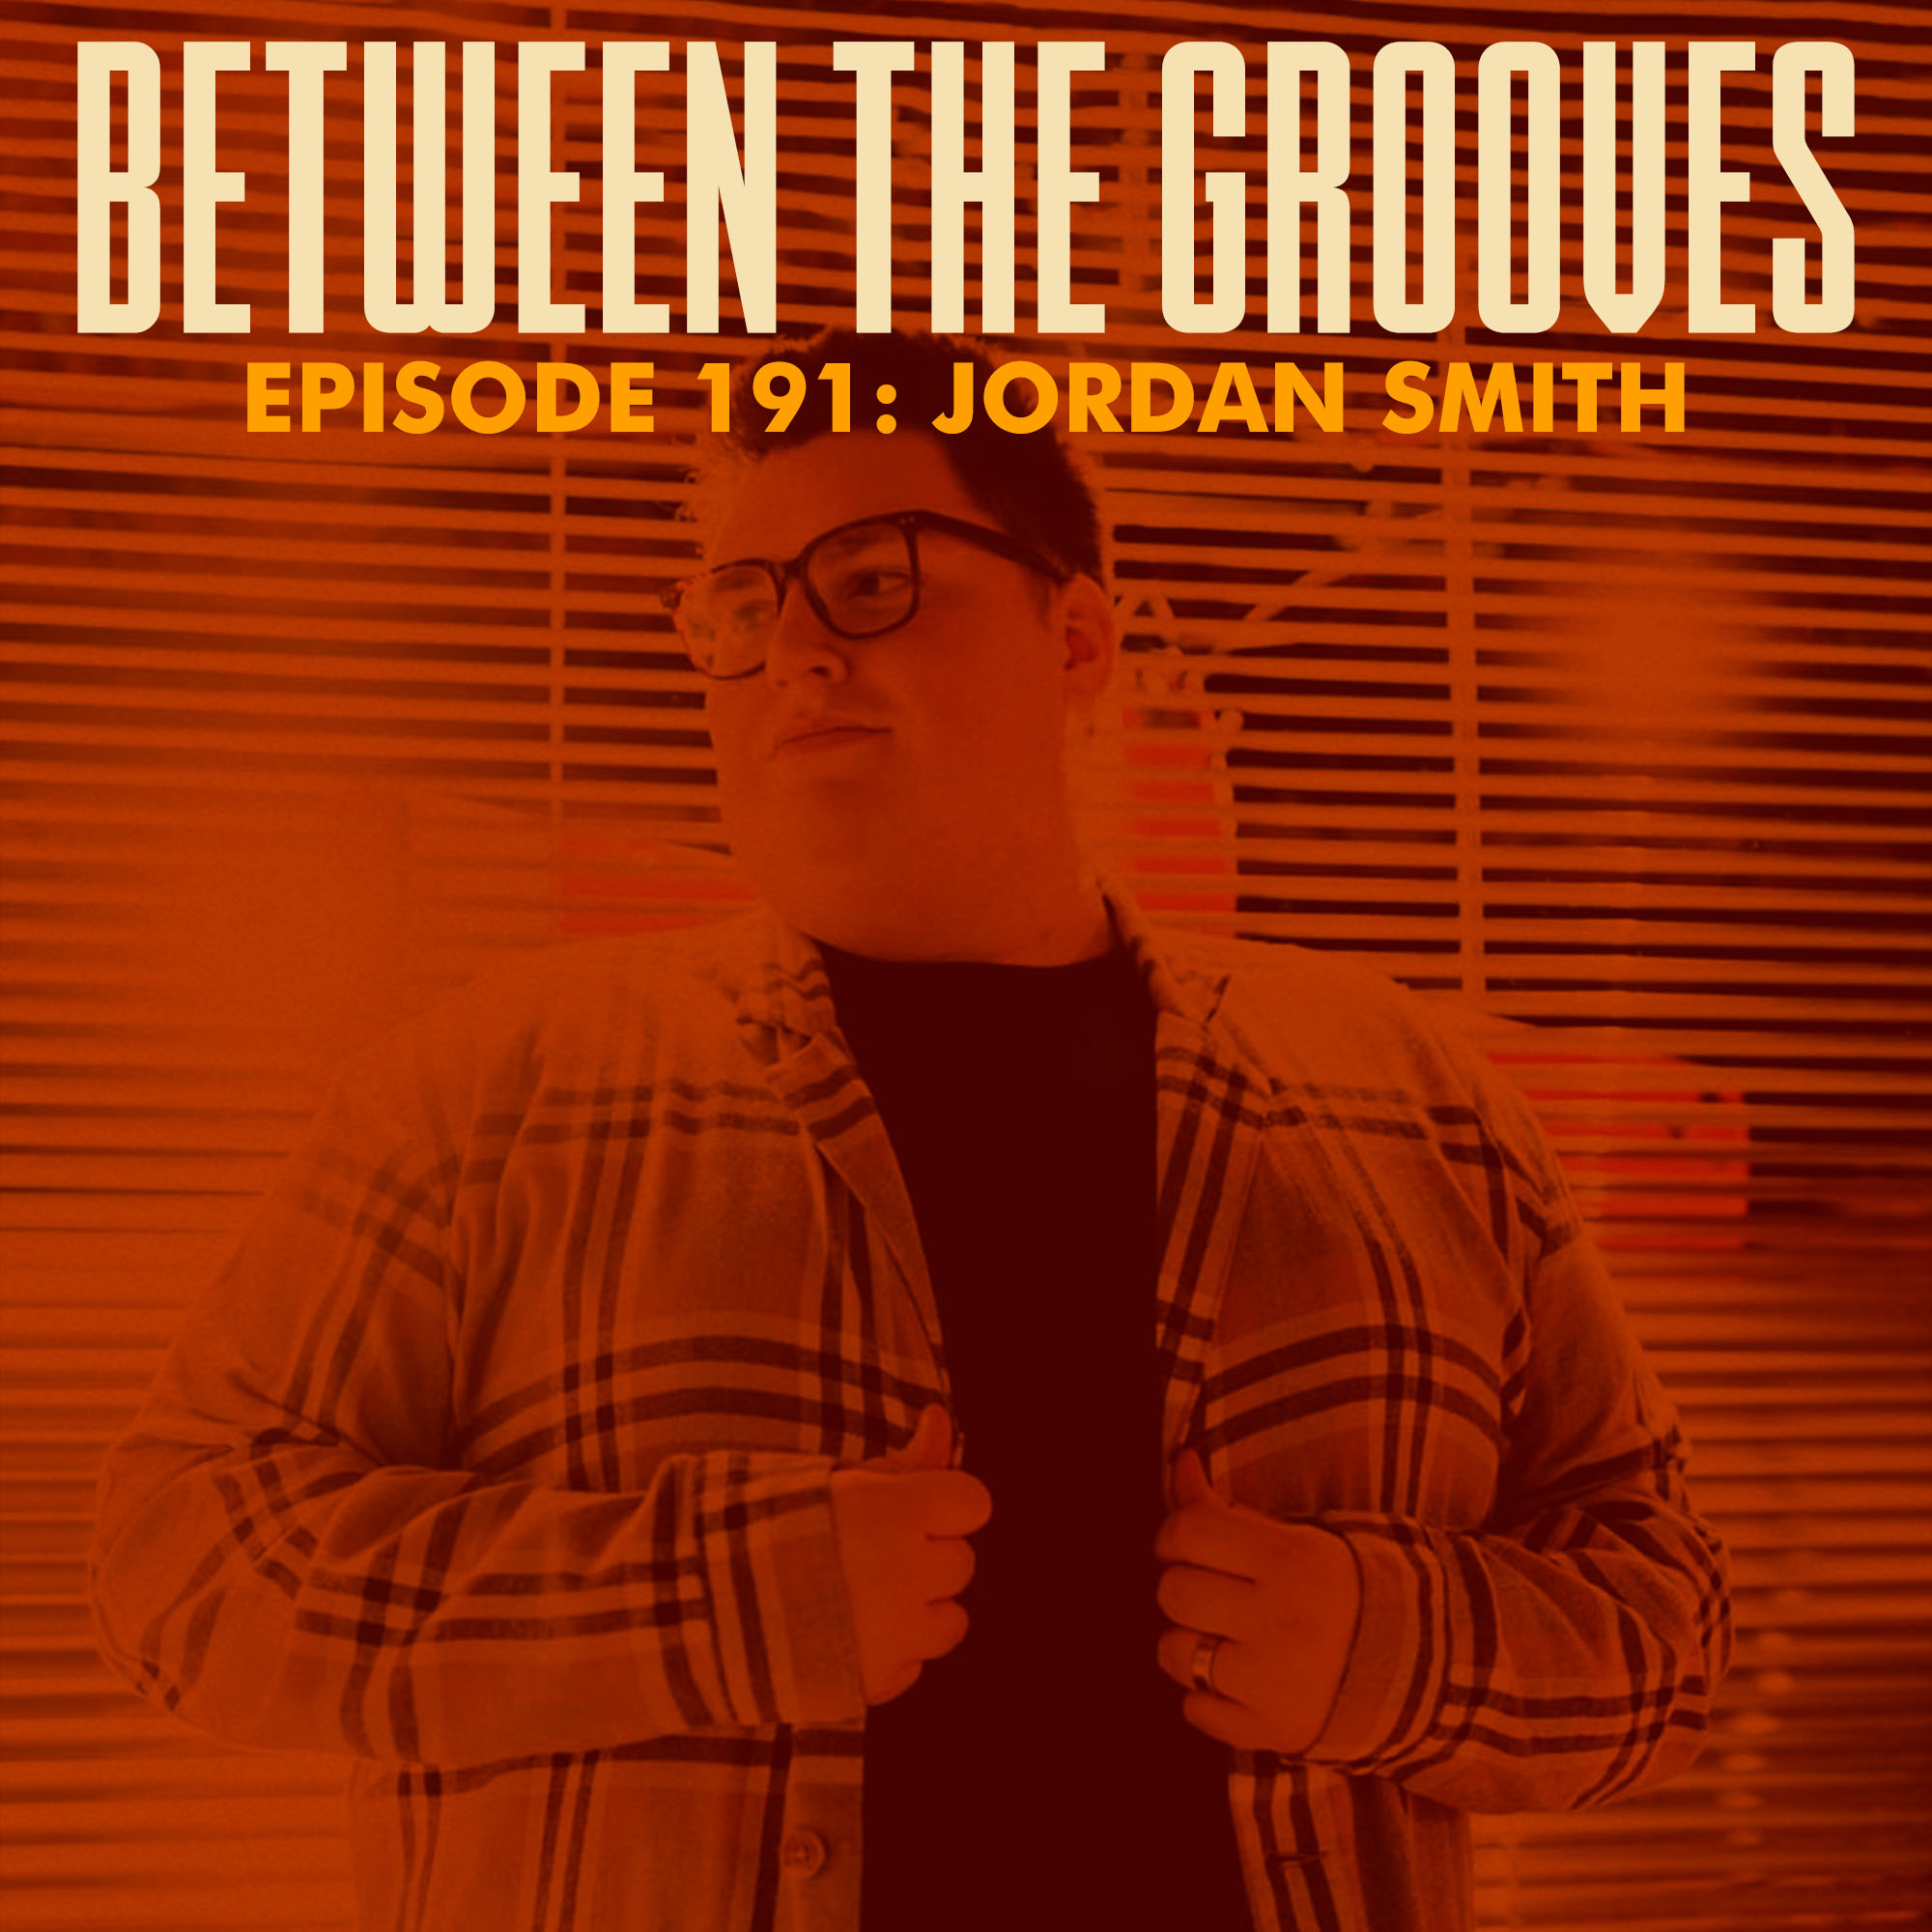 Changing Genres with Jordan Smith